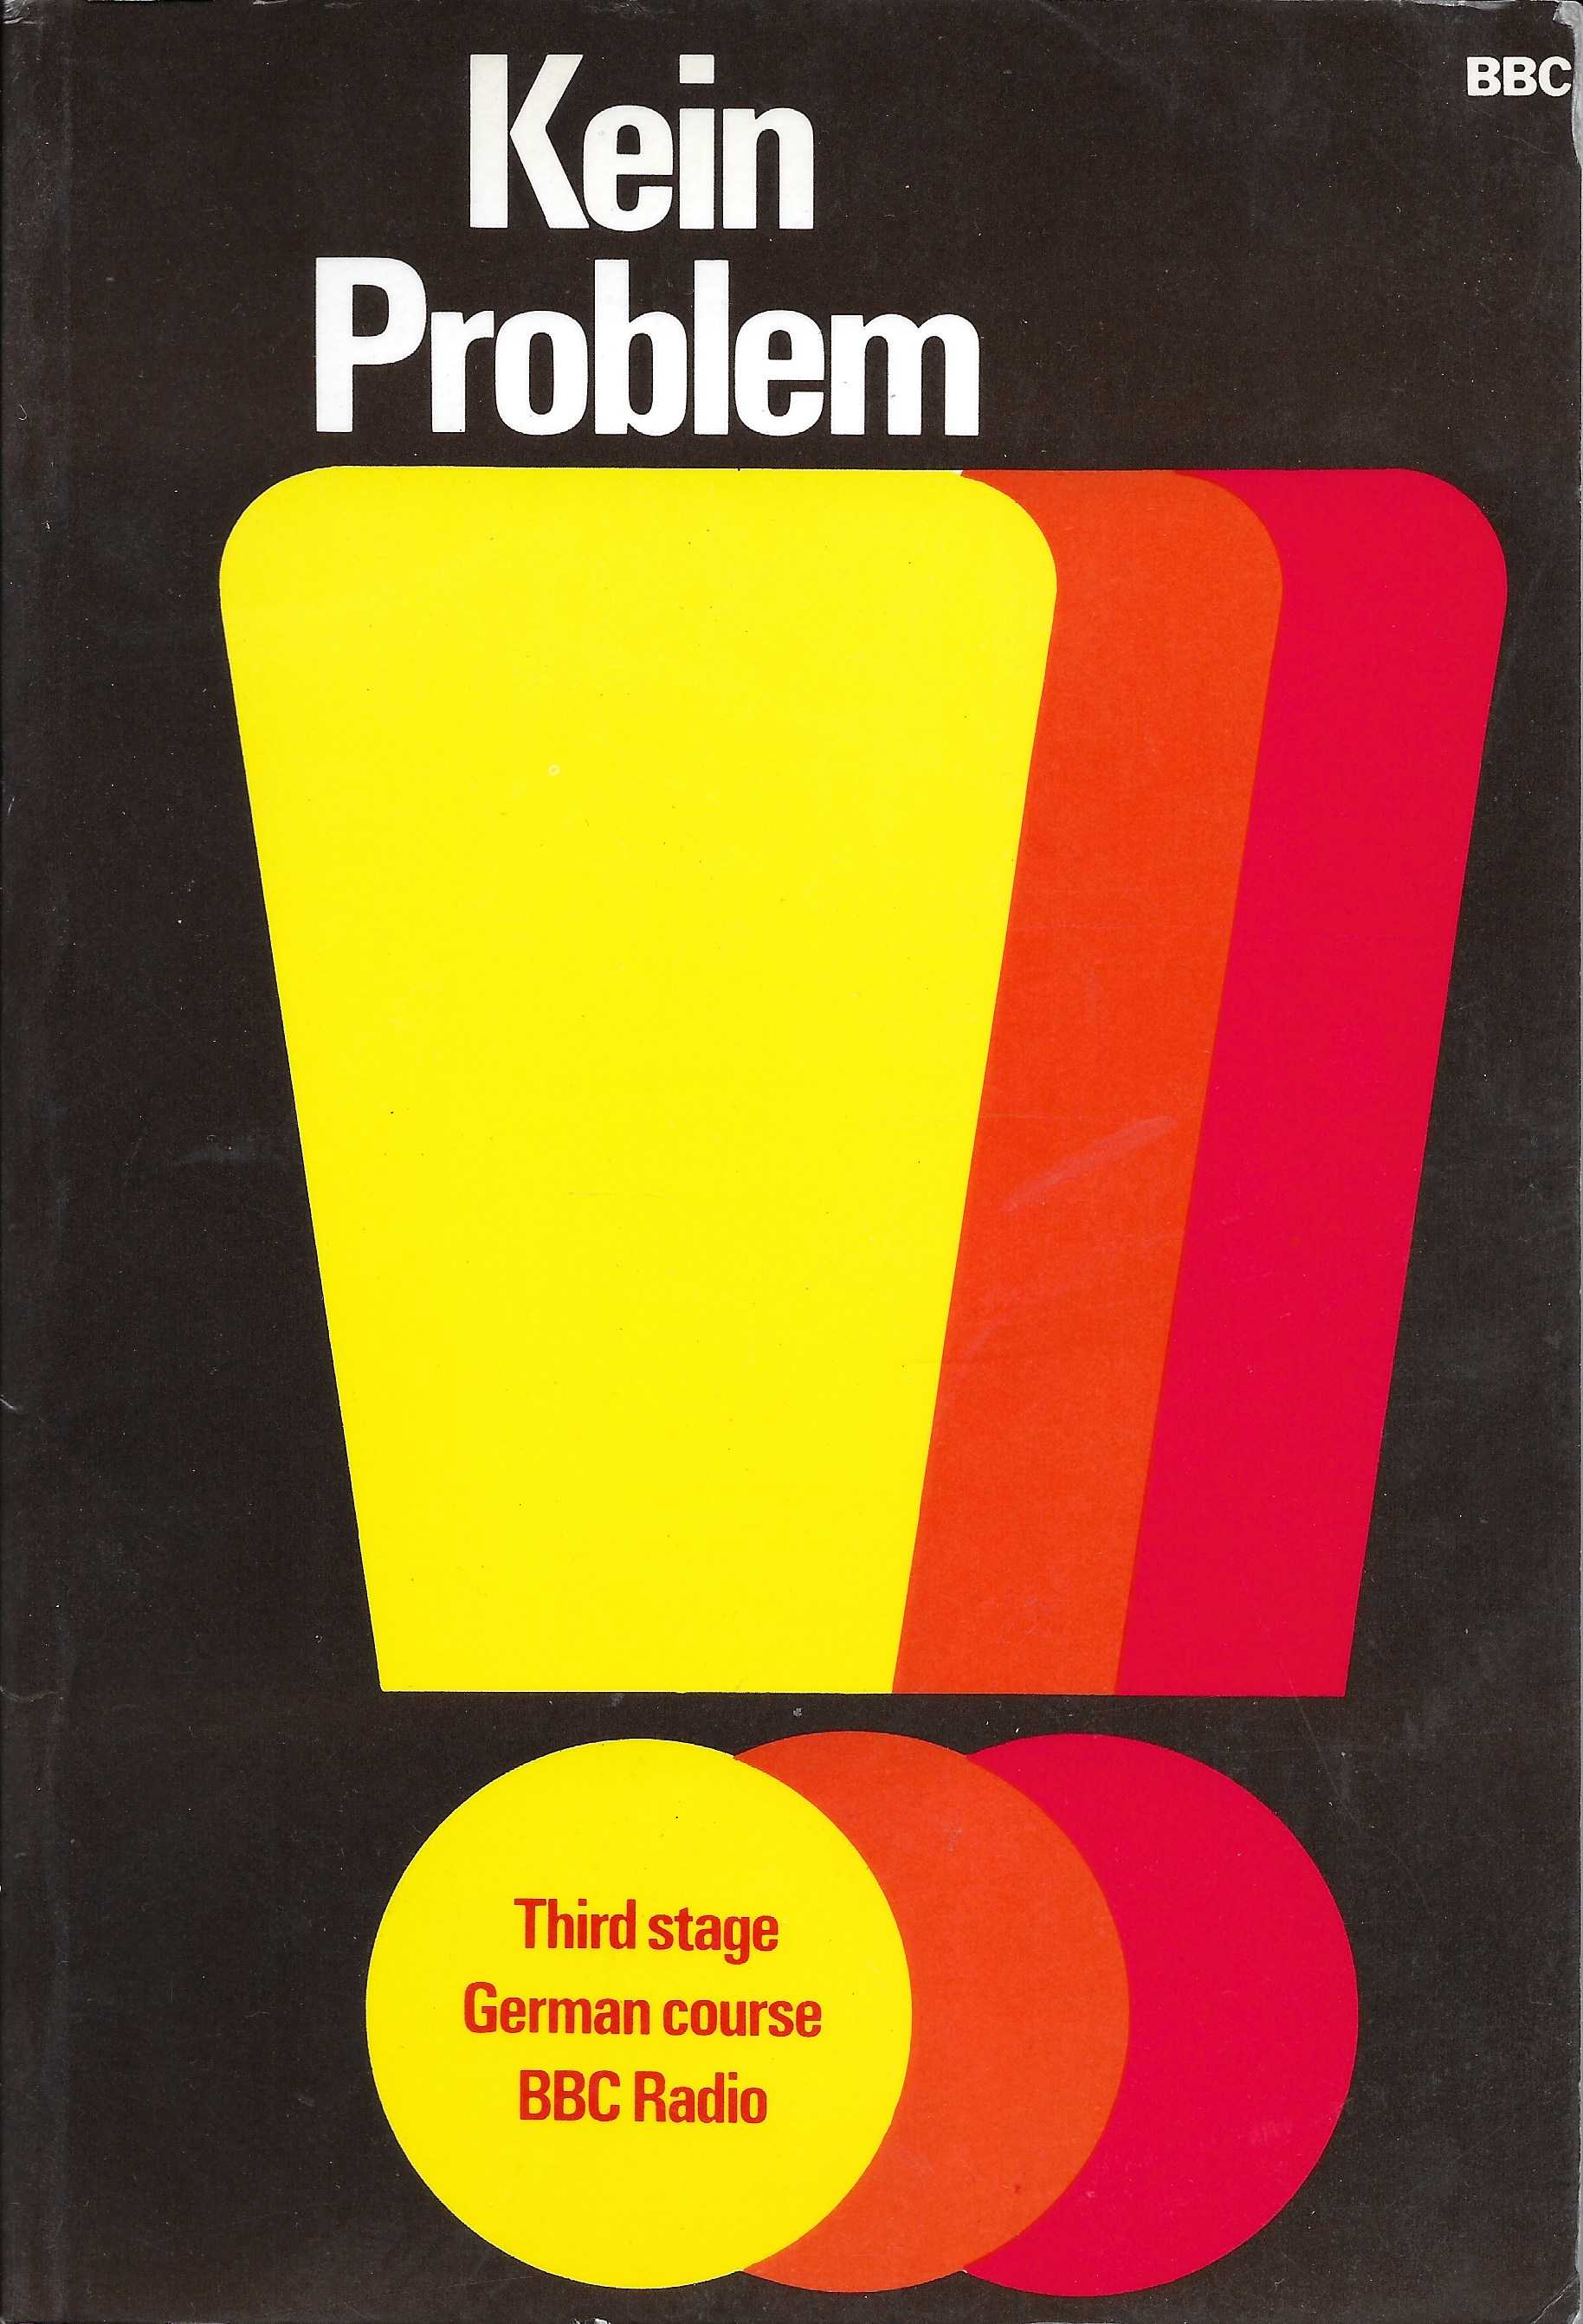 Picture of ISBN 0 563 16144 2 Kein problem by artist Vera Utton / Ursula Runde from the BBC books - Records and Tapes library